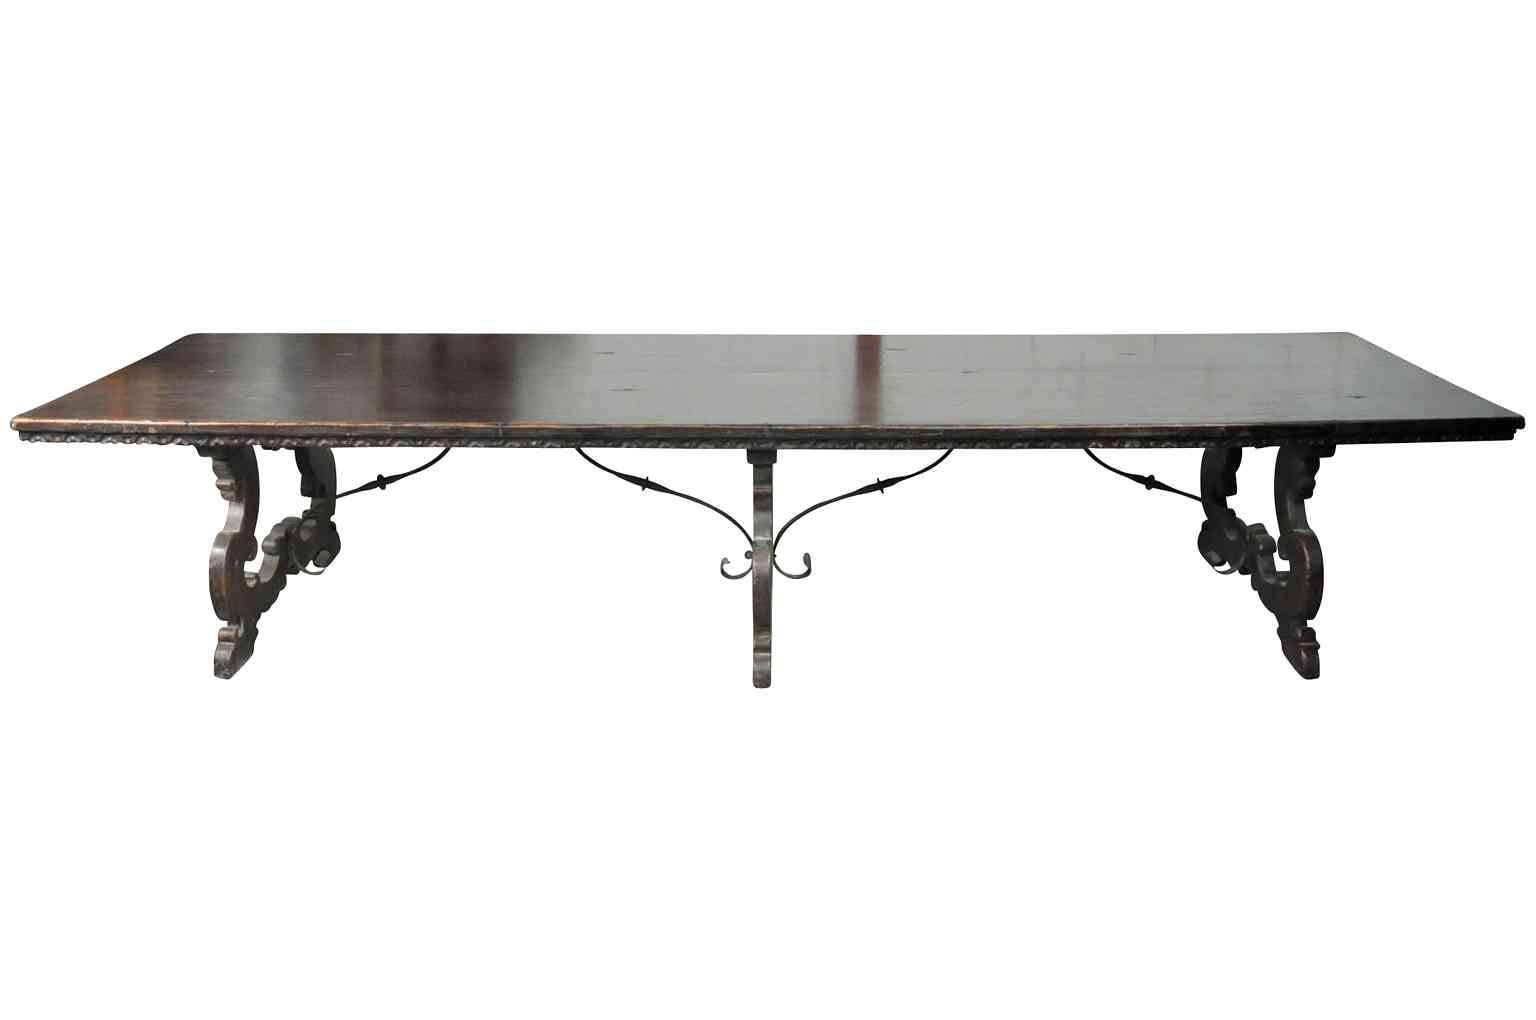 A monumental and unique 17th century style farm table, trestle table from Northern Italy. Masterly crafted from very sound and thick planks of antique walnut. The two board top has a wonderfully carved edge finish. The three sets of legs are